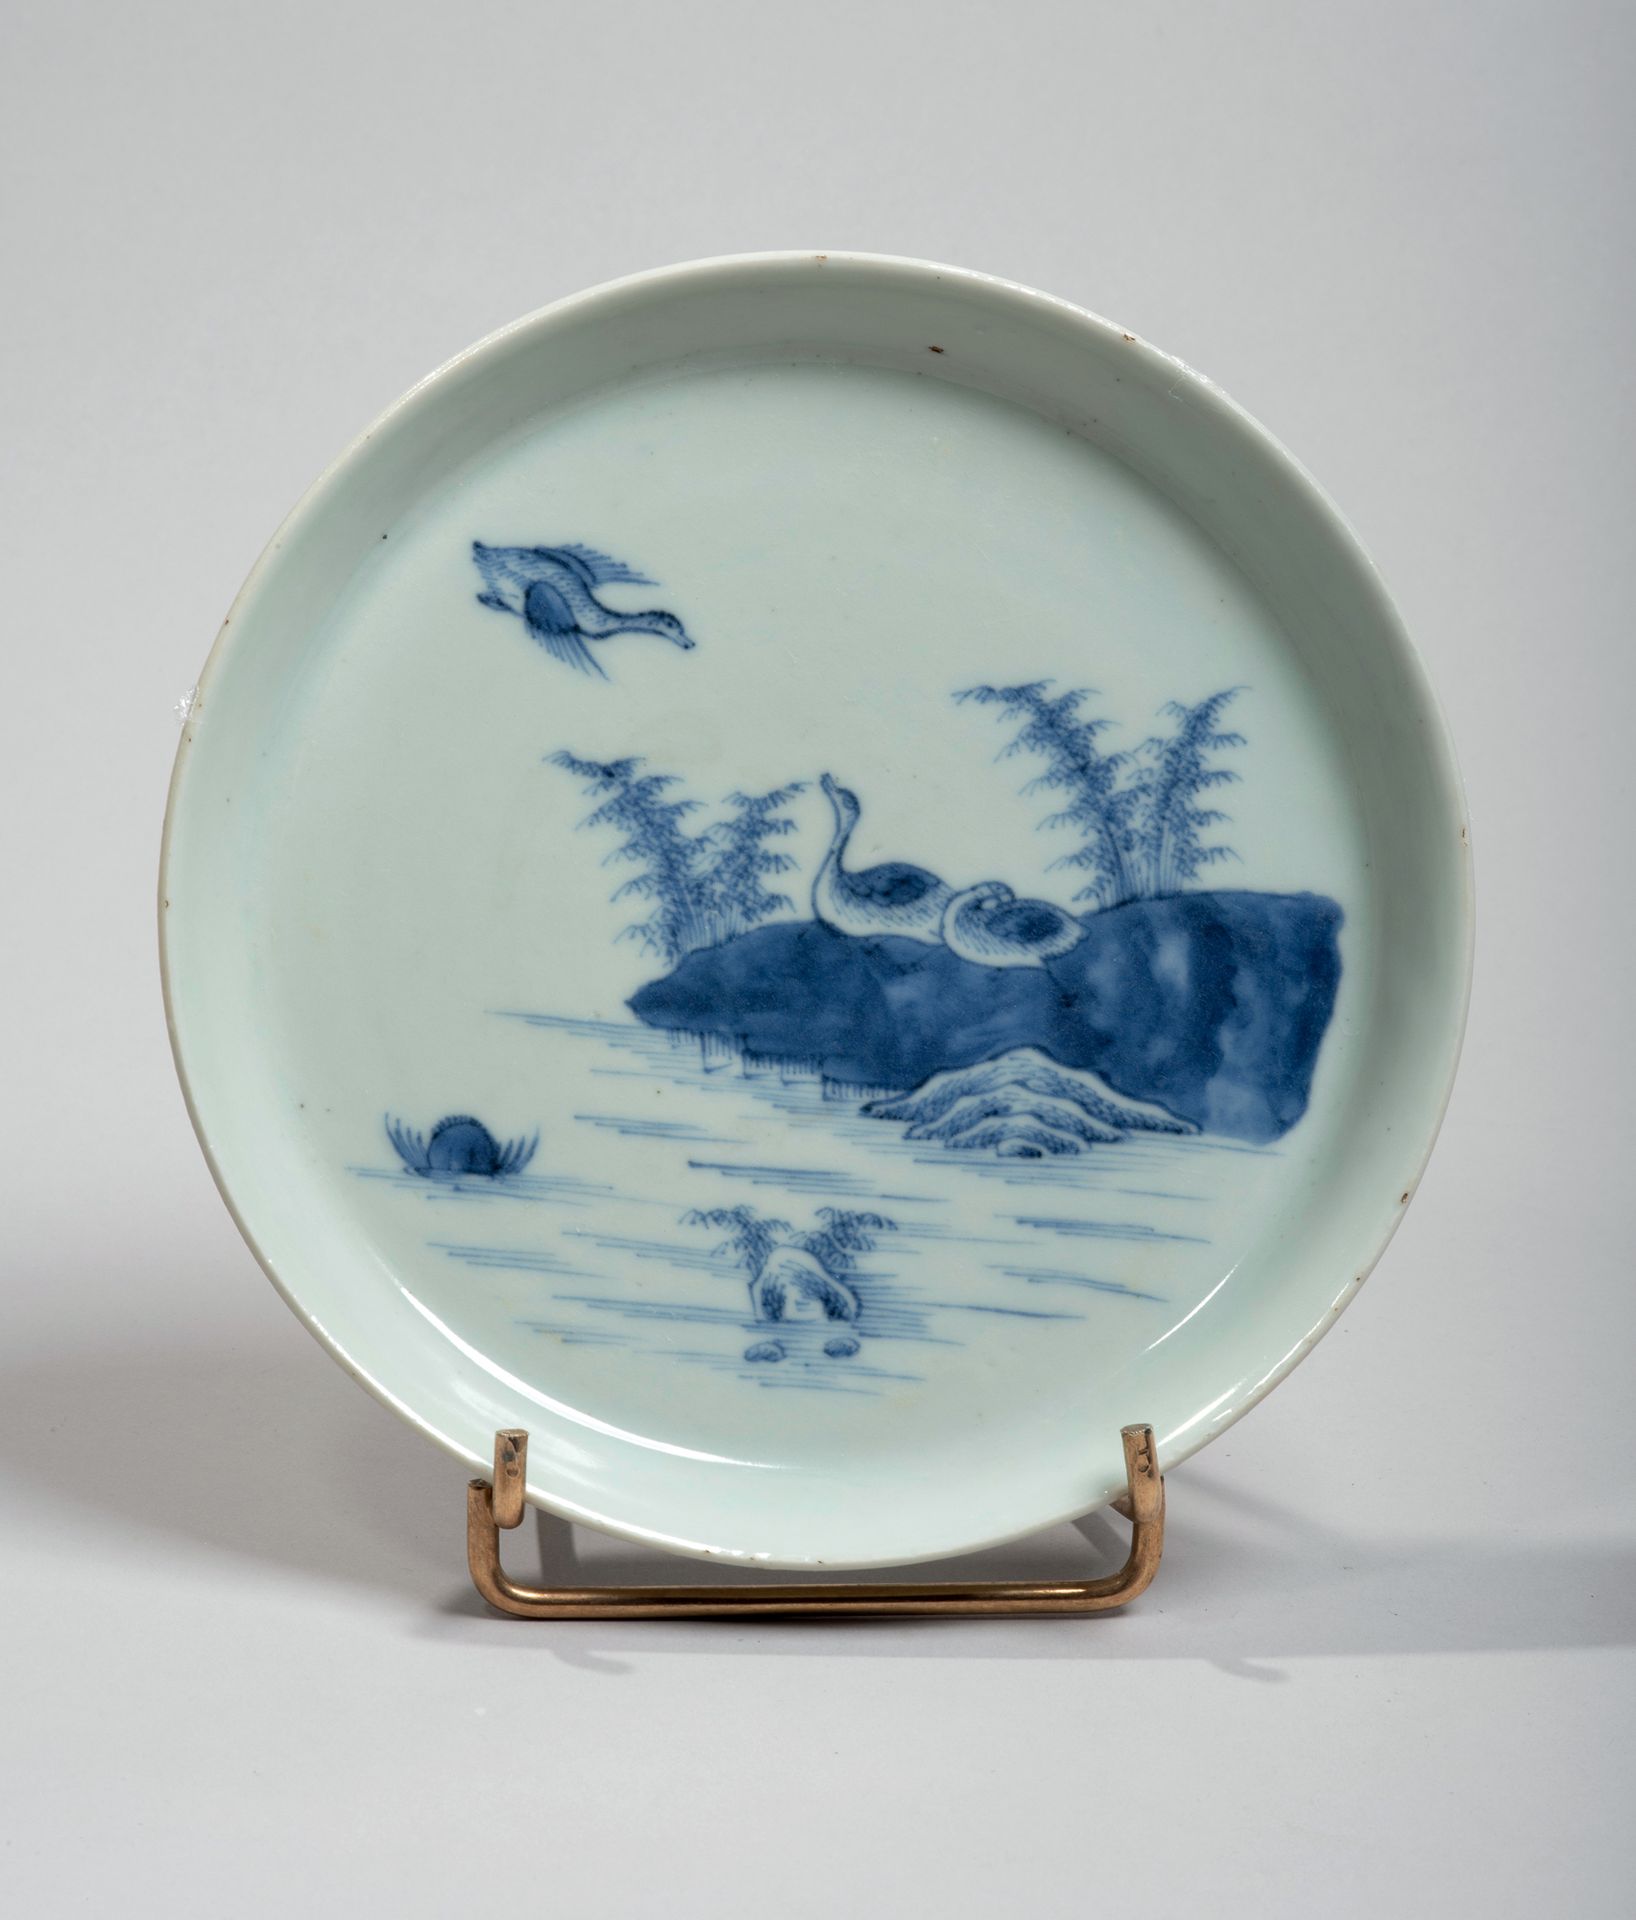 VIETNAM, Hue - XVIIIe siècle 
Porcelain bowl decorated in blue underglaze with a&hellip;